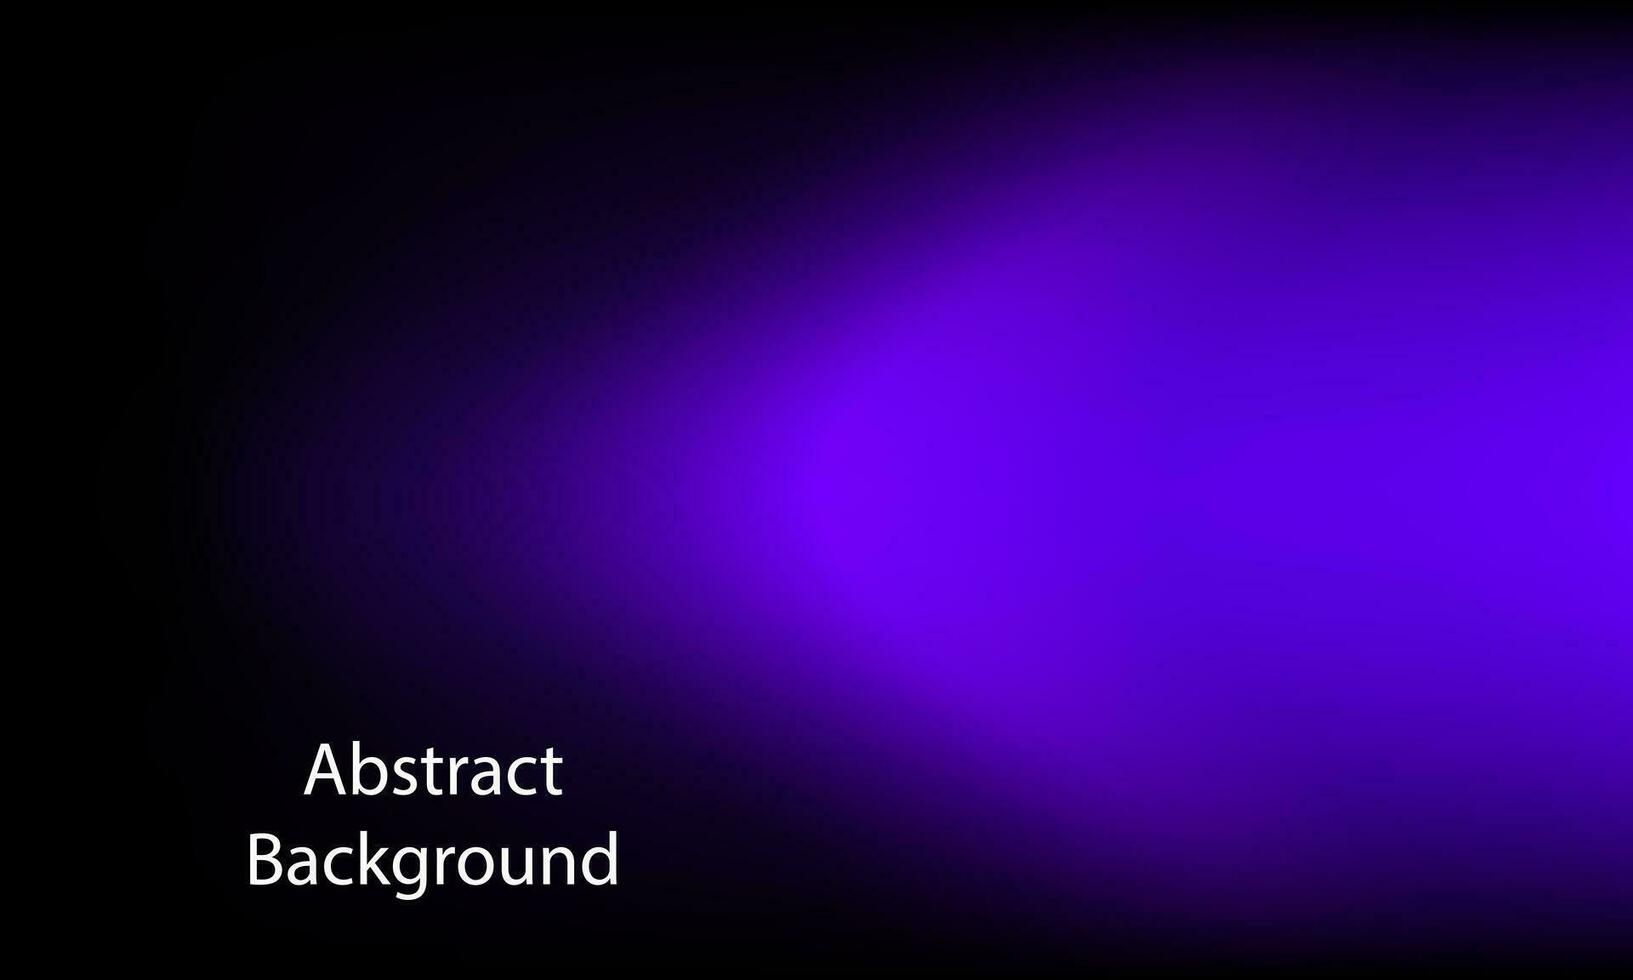 Abstract background with blurred light effects. Purple and Blue Color tone Vector illustration for your design.